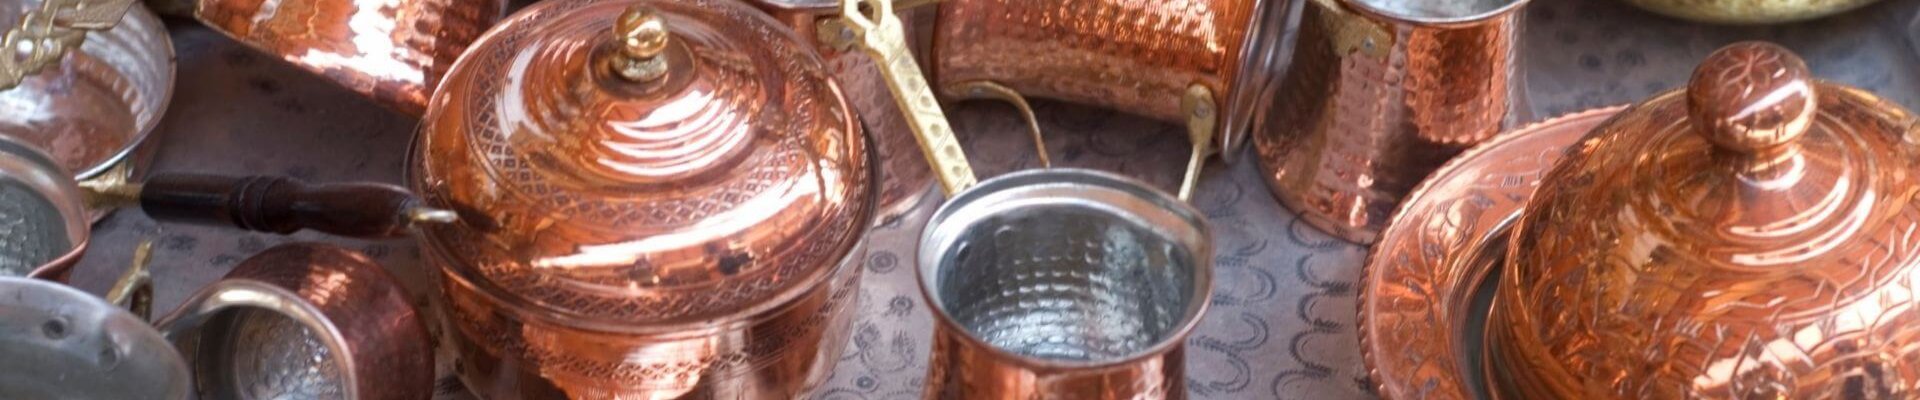 Copper cookware - High-End - High Quality